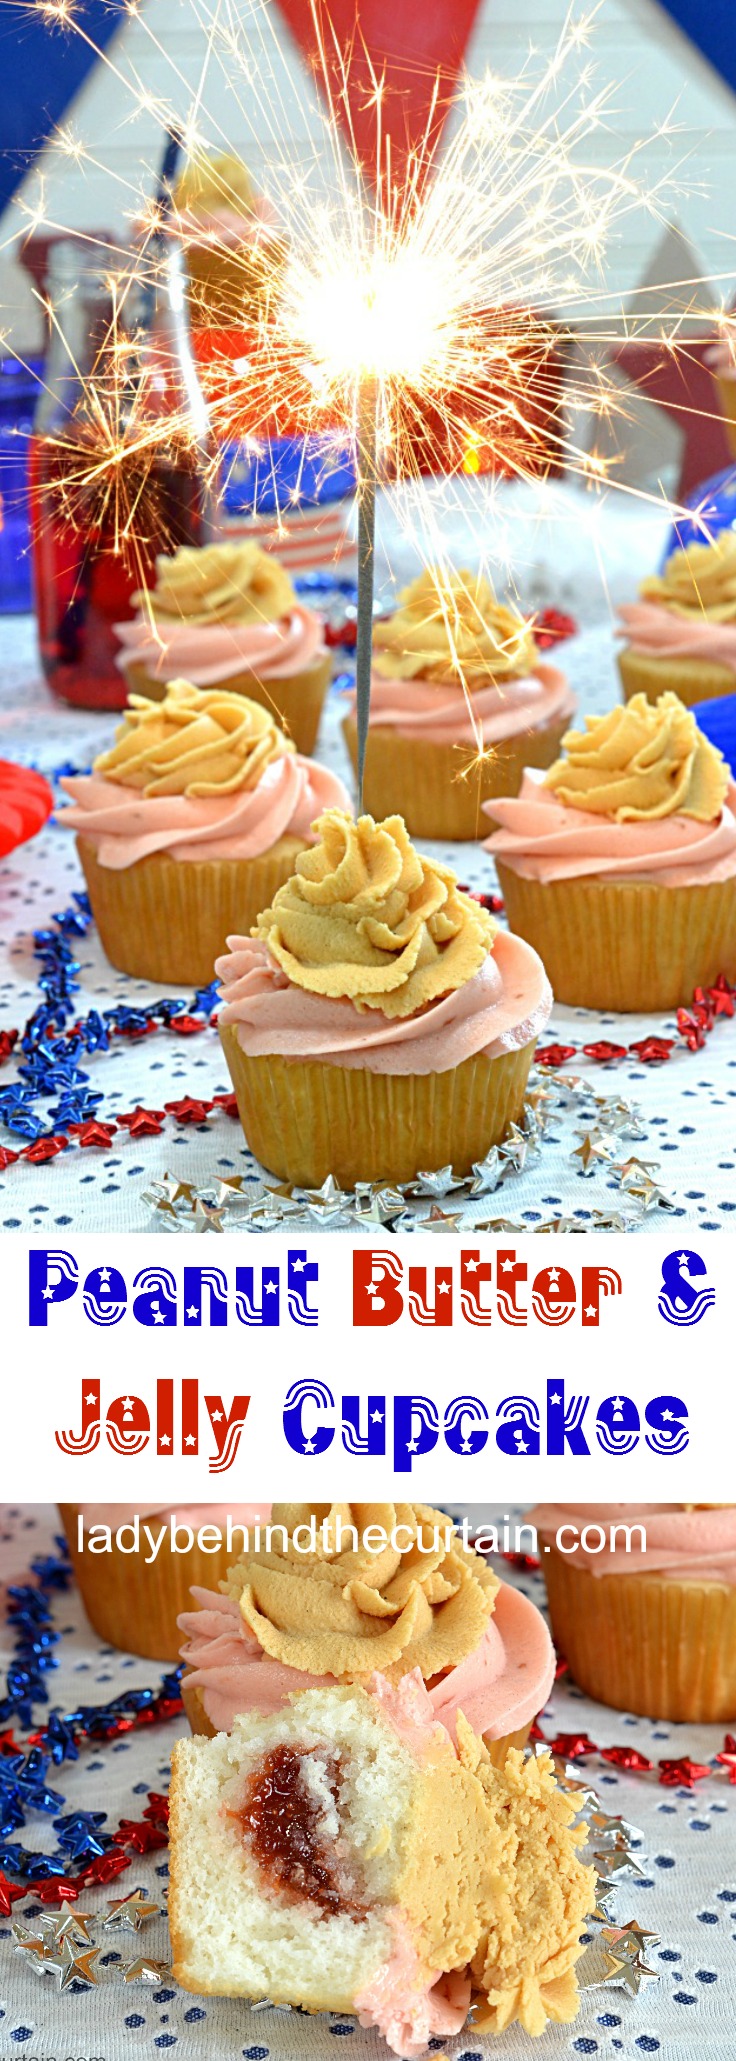 Peanut Butter and Jelly Cupcakes